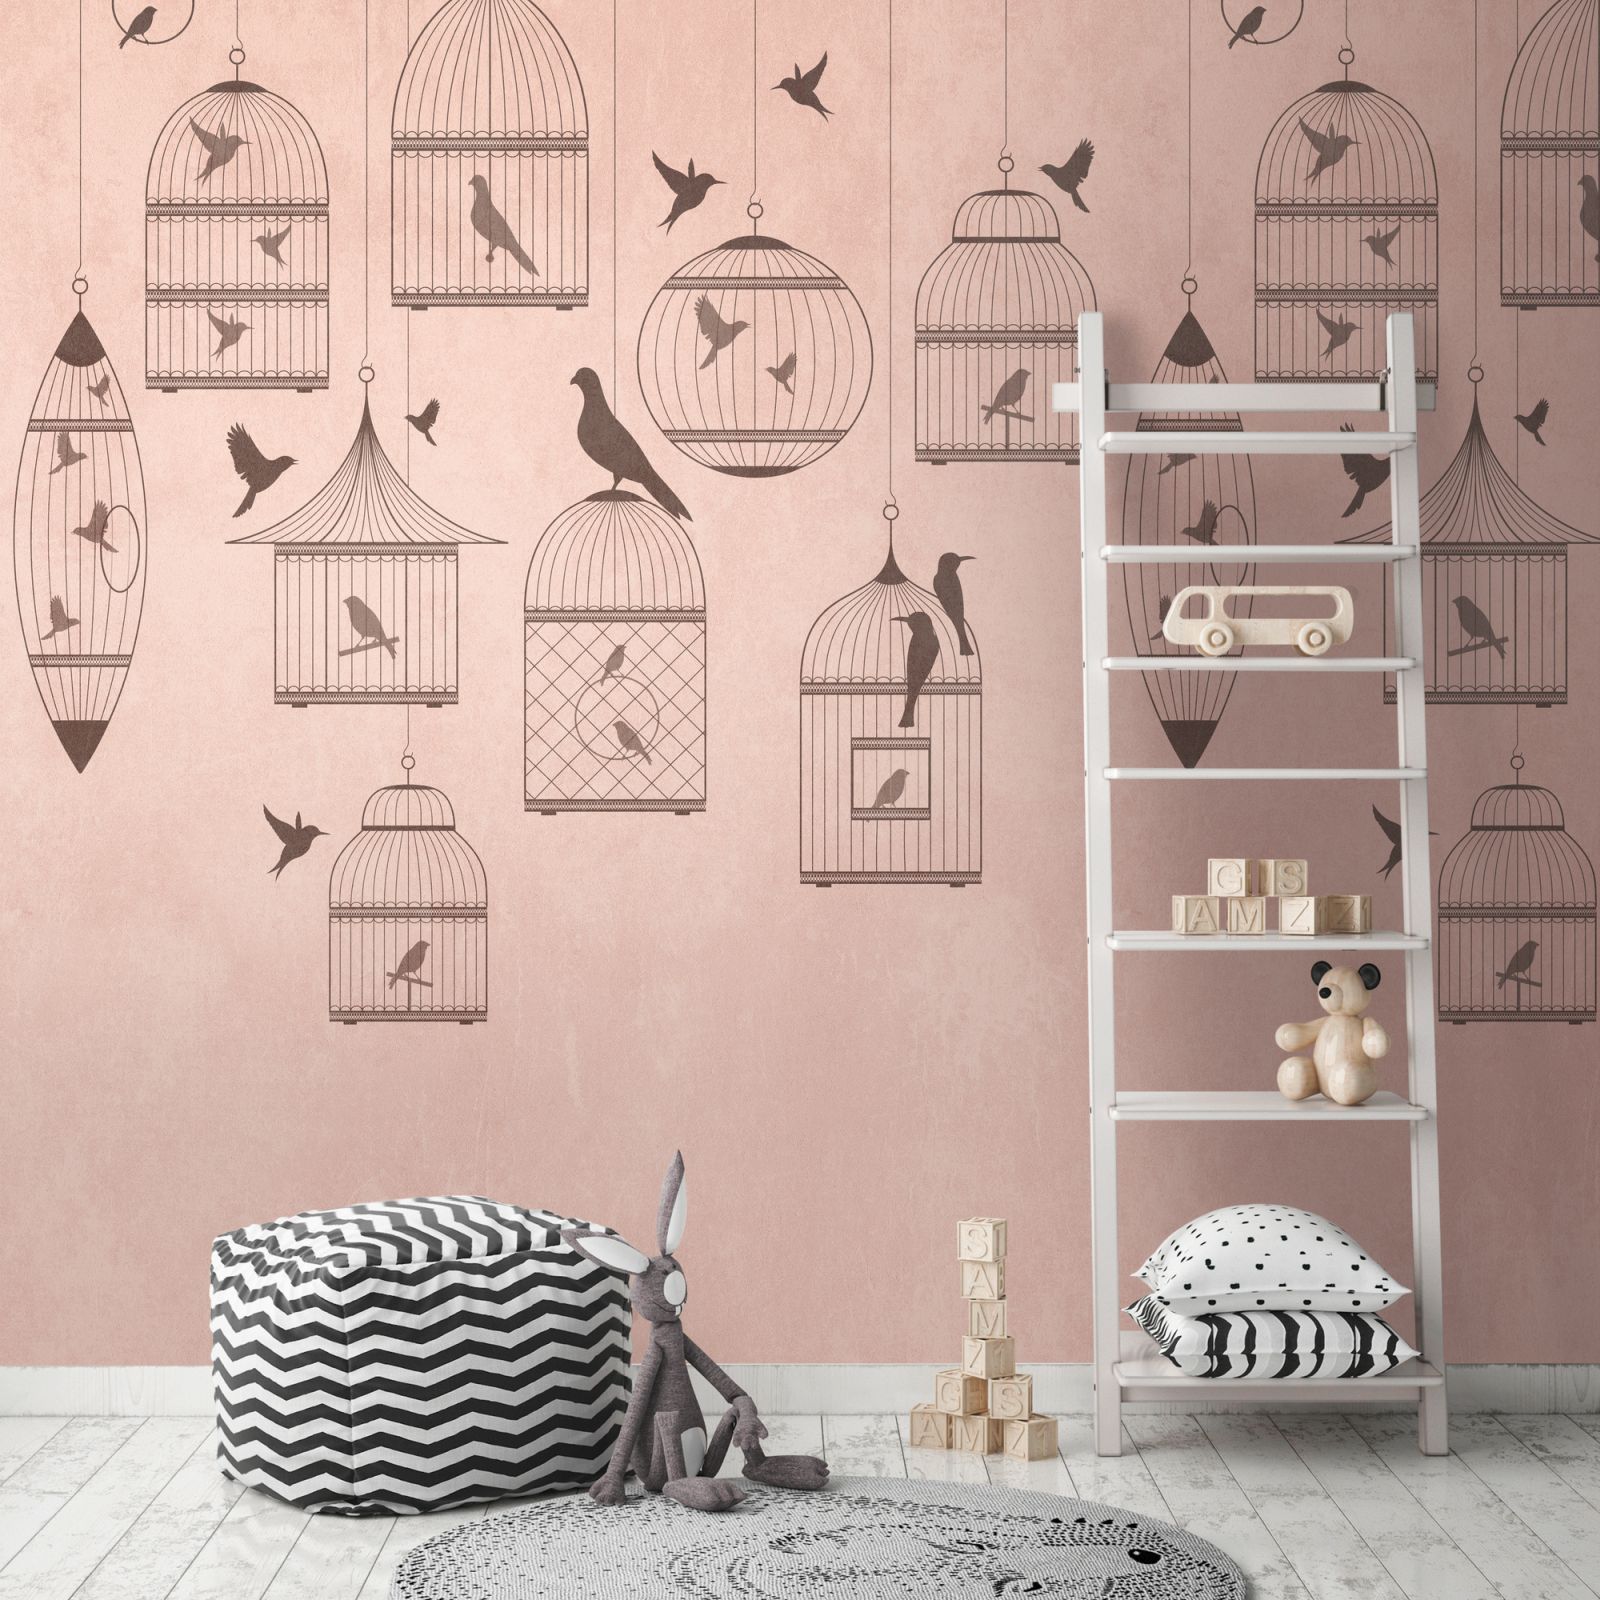 The Wall - Birdcages - Rosa, Beige